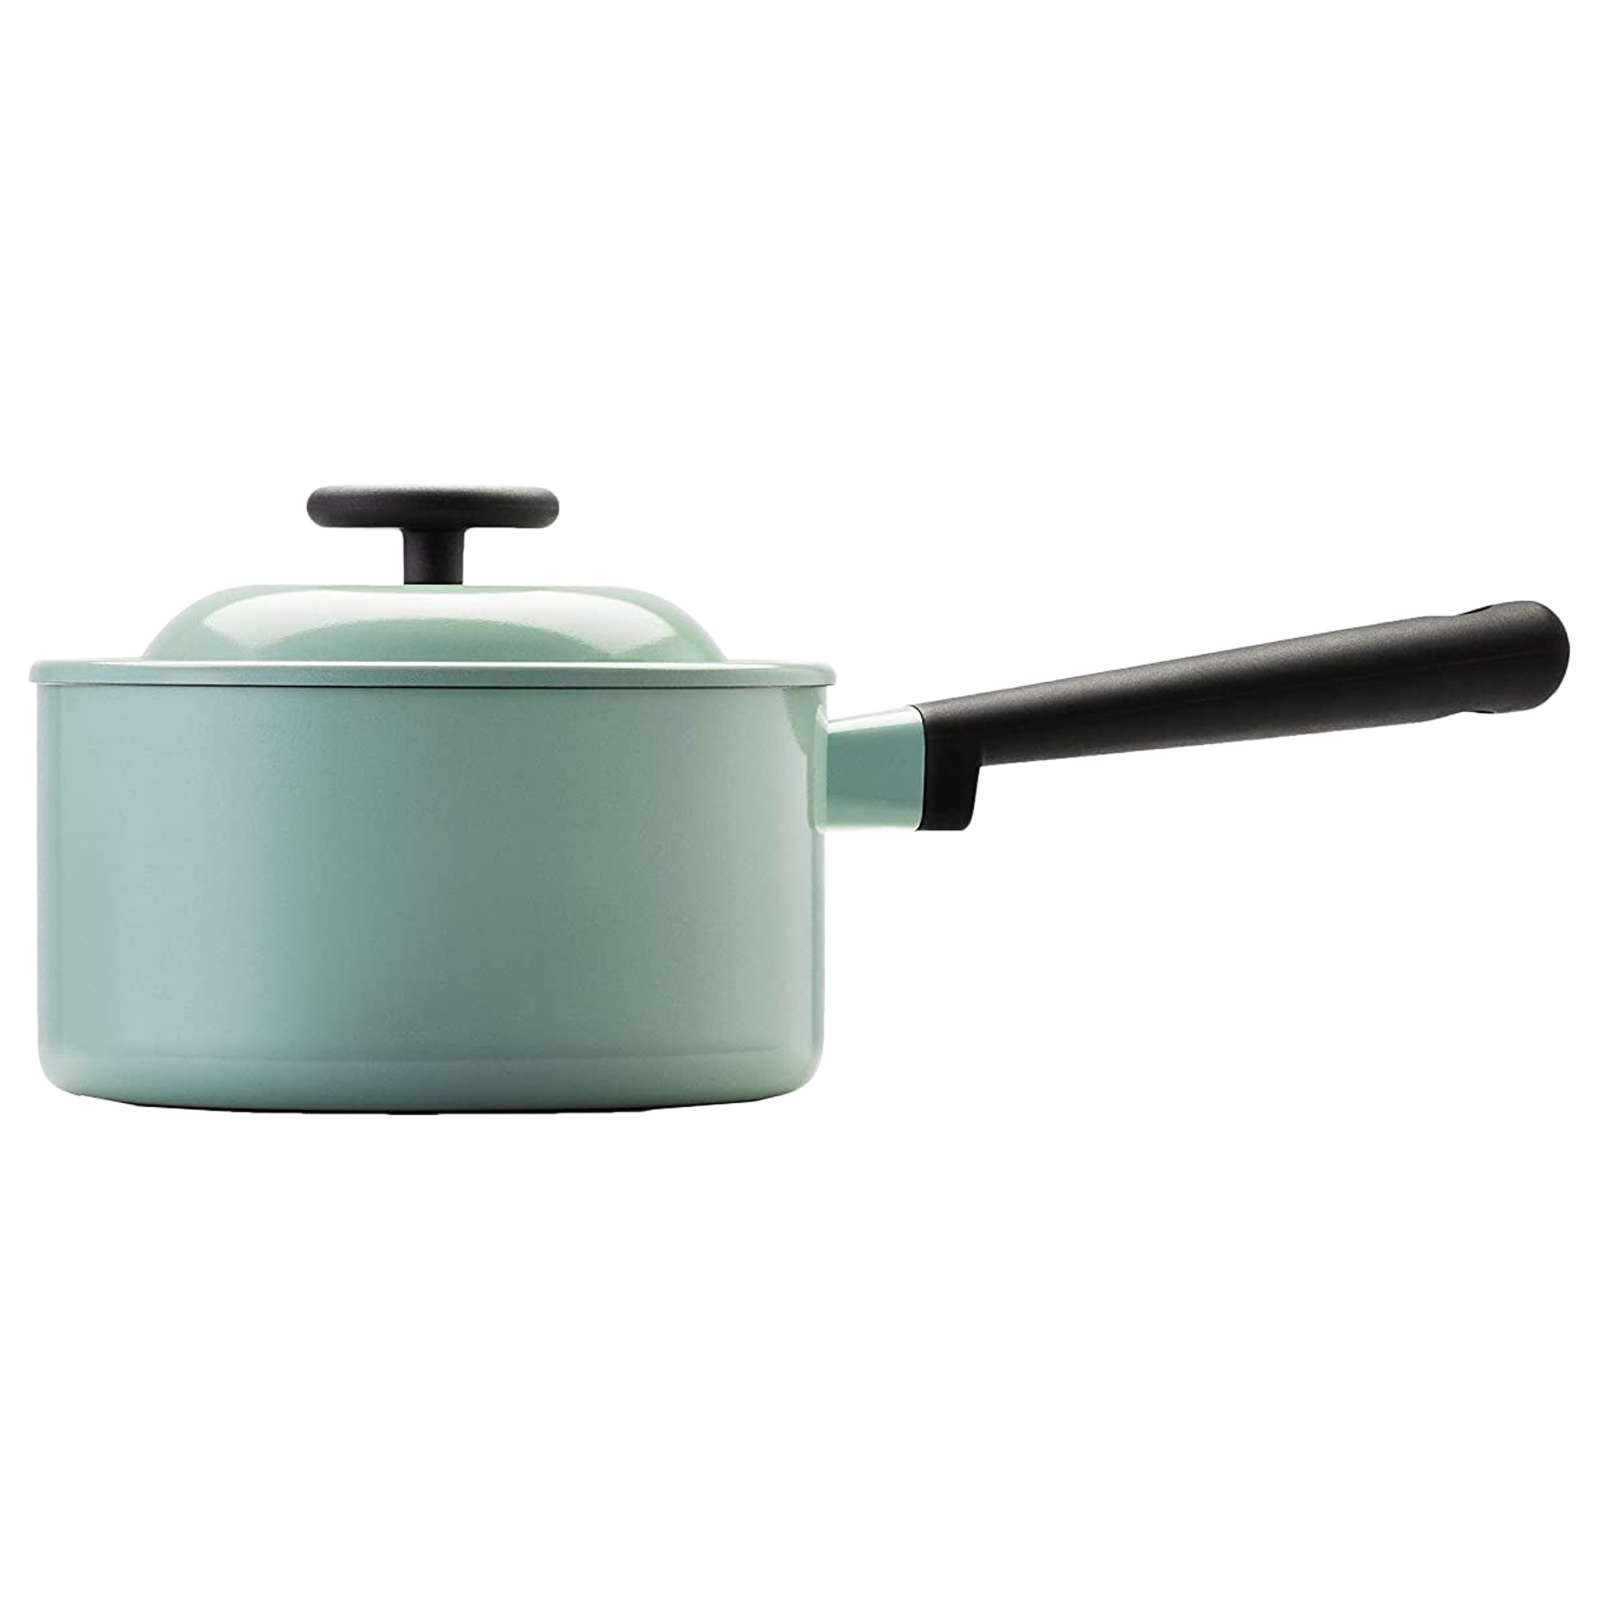 Lock & Lock Decore Sauce Pan with Lid For Induction and Stoves & Cooktops (Non-Stick, LDE1181IH, Green)_1